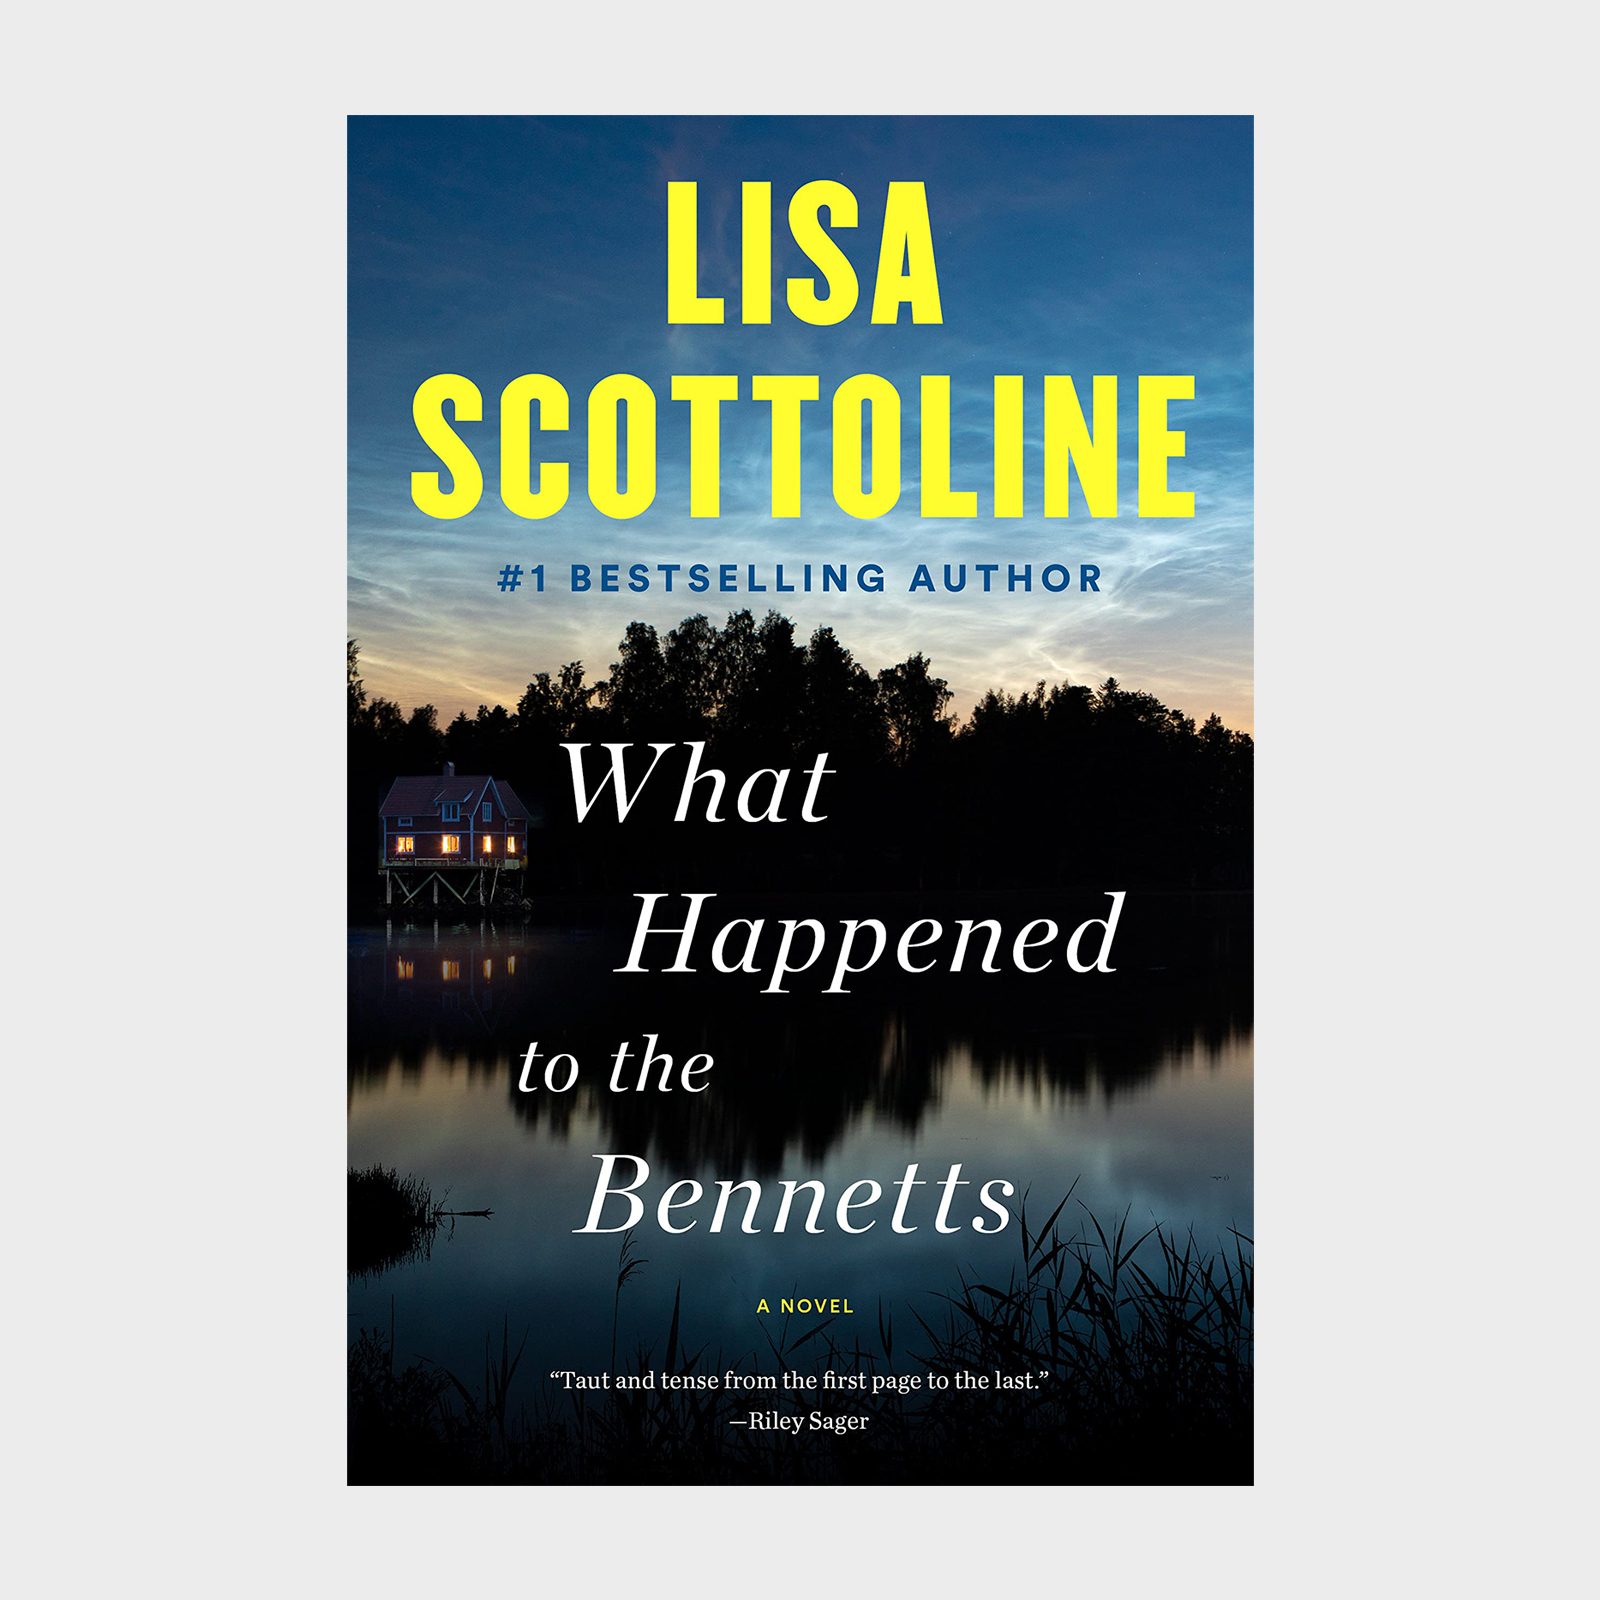 <p class=""><strong>Release date:</strong> Mar. 29, 2022</p> <p>Yet another much-anticipated suspense novel, <a href="https://www.amazon.com/What-Happened-Bennetts-Lisa-Scottoline/dp/0525539670/" rel="noopener noreferrer"><em>What Happened to the Bennetts</em></a> presents readers with a classic conundrum: What if you had to choose between following the law and finding true justice? In this fast-paced book, a carjacking changes the lives of the Bennetts forever. They're shuttled into witness protection, where they begin to crumble under psychological stress, chronic uncertainty and complete lack of control over their own paths. But when the father gets wind of what really precipitated that one random act of violence, he decides to take matters into his own hands.</p> <p class="listicle-page__cta-button-shop"><a class="shop-btn" href="https://www.amazon.com/What-Happened-Bennetts-Lisa-Scottoline/dp/0525539670/">Shop Now</a></p>